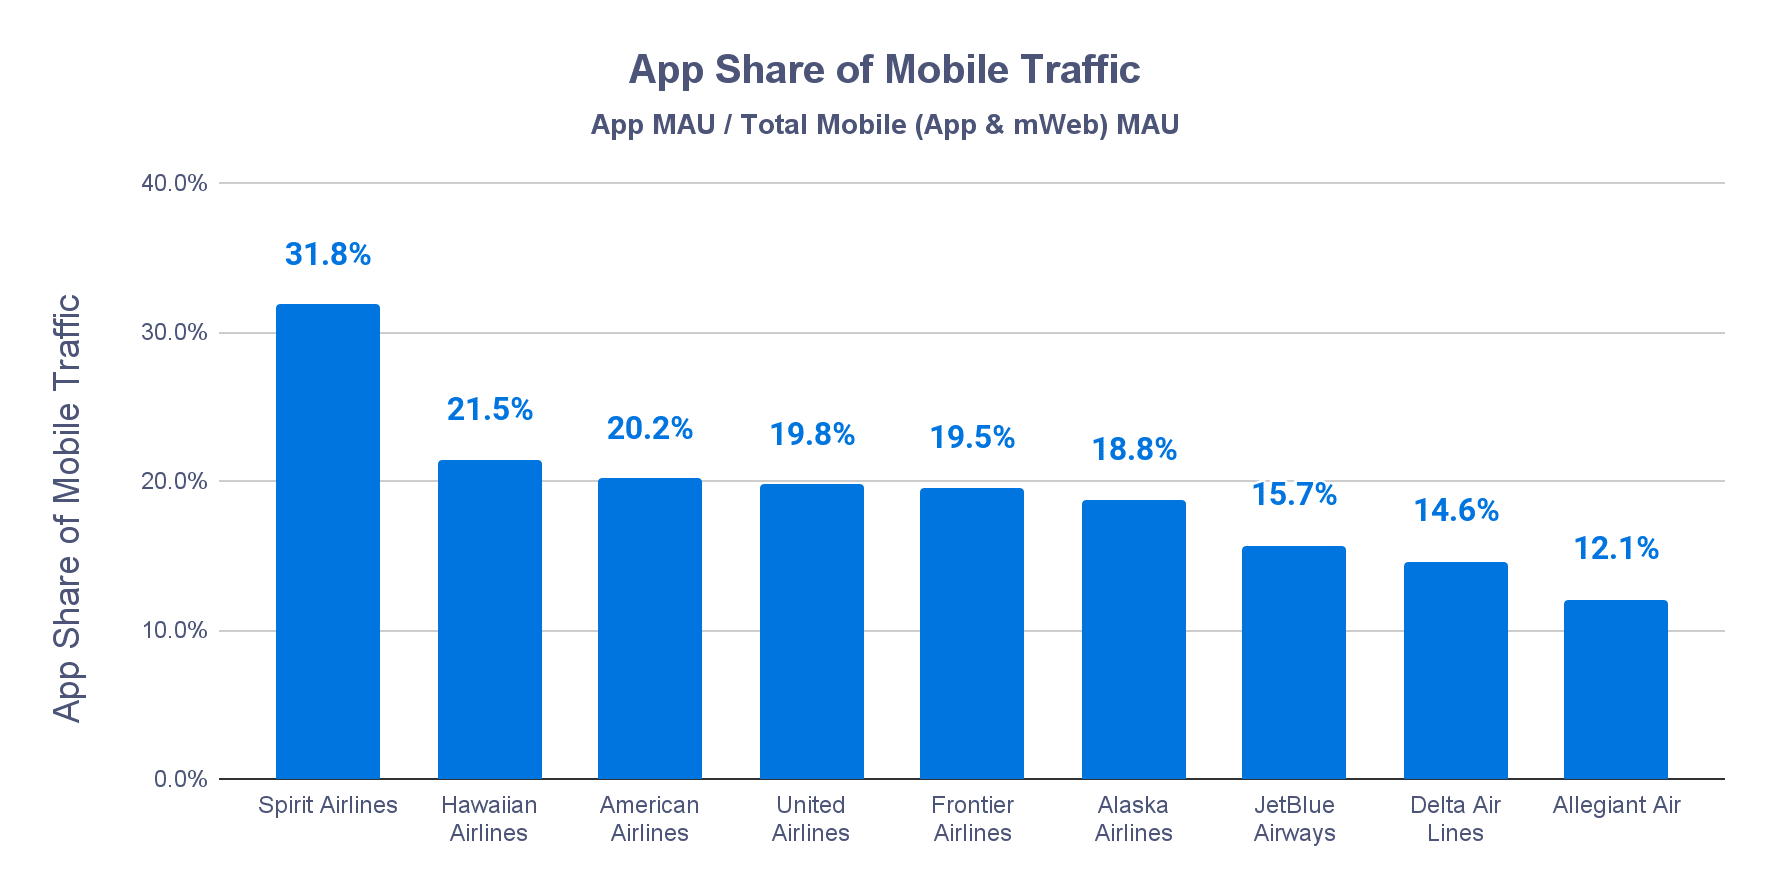 Graph of "App Share of Mobile Traffic" Subtitled: App MAU / Total Mobile (App and mWeb) MAU X axis: App Share of Mobile Traffic Y axis: airlines Spirit Airlines: 31.8% Hawaiin Airlines: 21.5% American Airlines: 20.2% United Airlines: 19.8% Frontier Airlines: 19.5% Alaska Airlines: 18.8% JetBlue Airways: 15.7% Delta Air Lines: 14.6% Allegiant Air: 12.1%